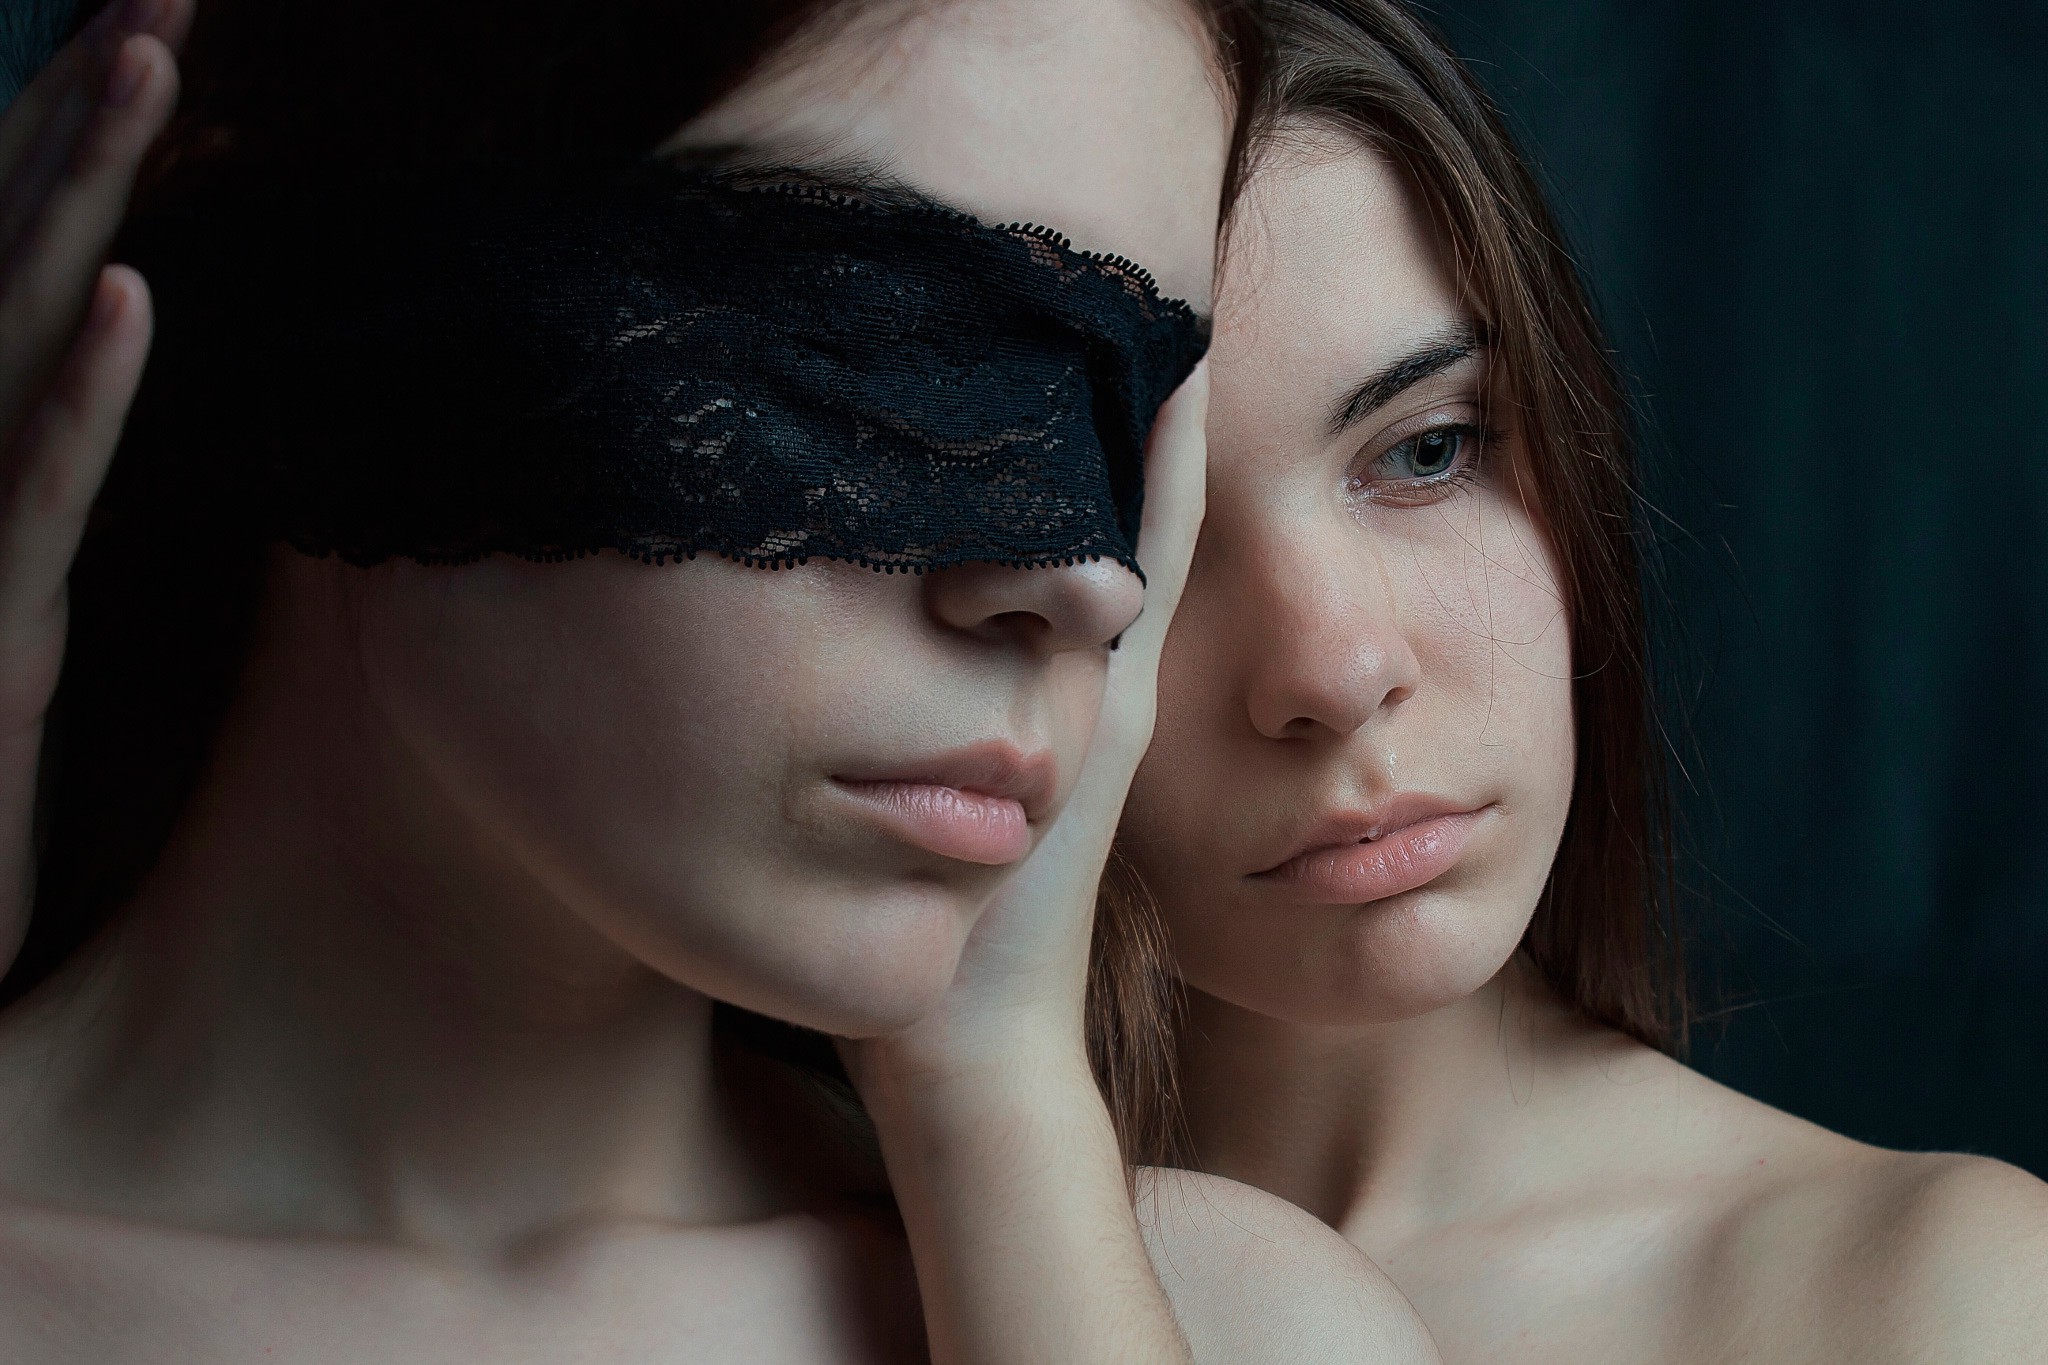 women, Model, Blindfold, Twins, Face, Tears, Crying Wallpaper